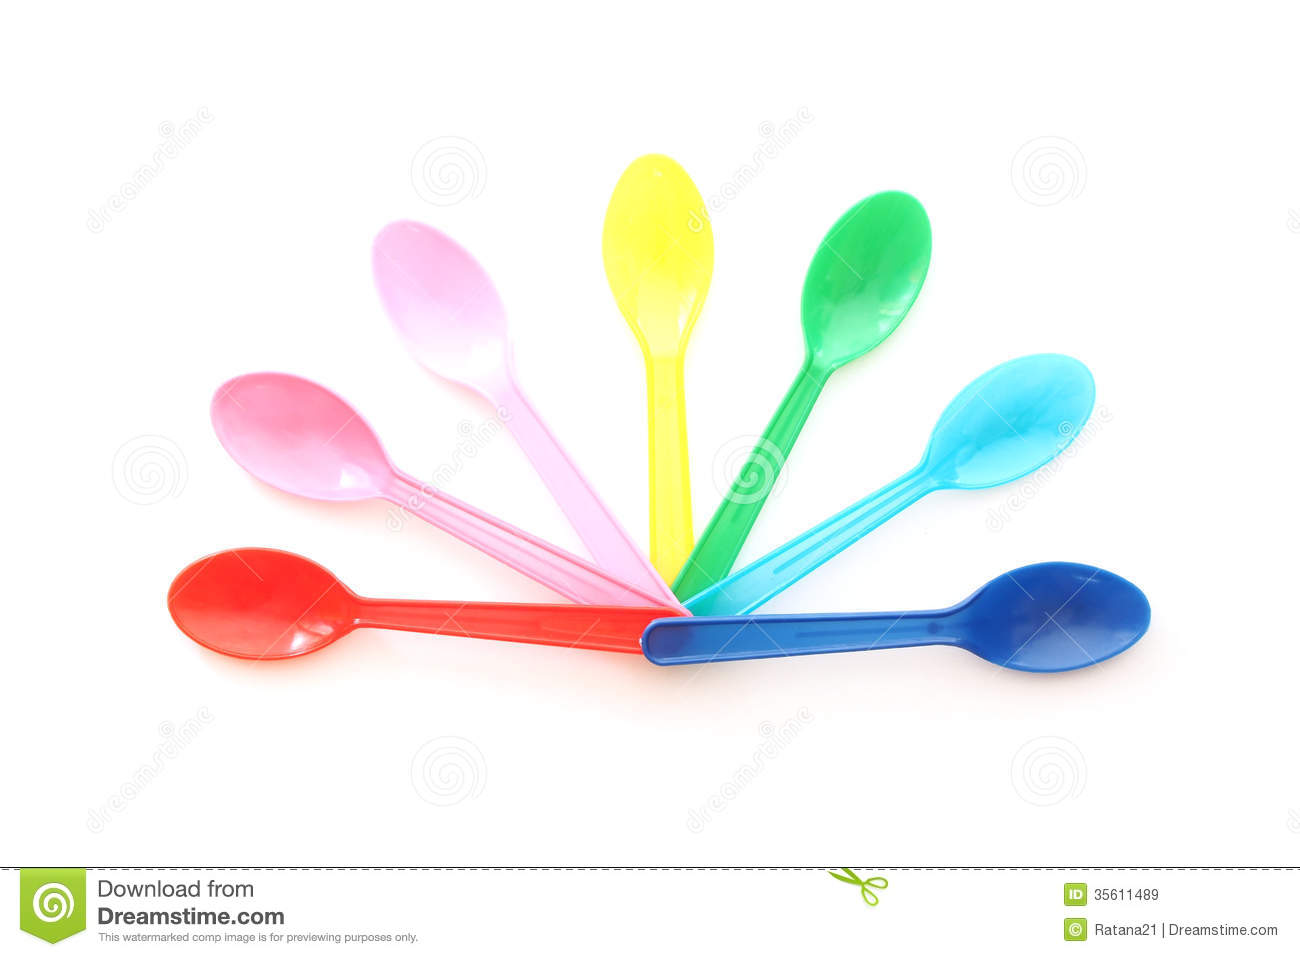 Multicolor Plastic Spoons Royalty Free Stock Images   Image  35611489